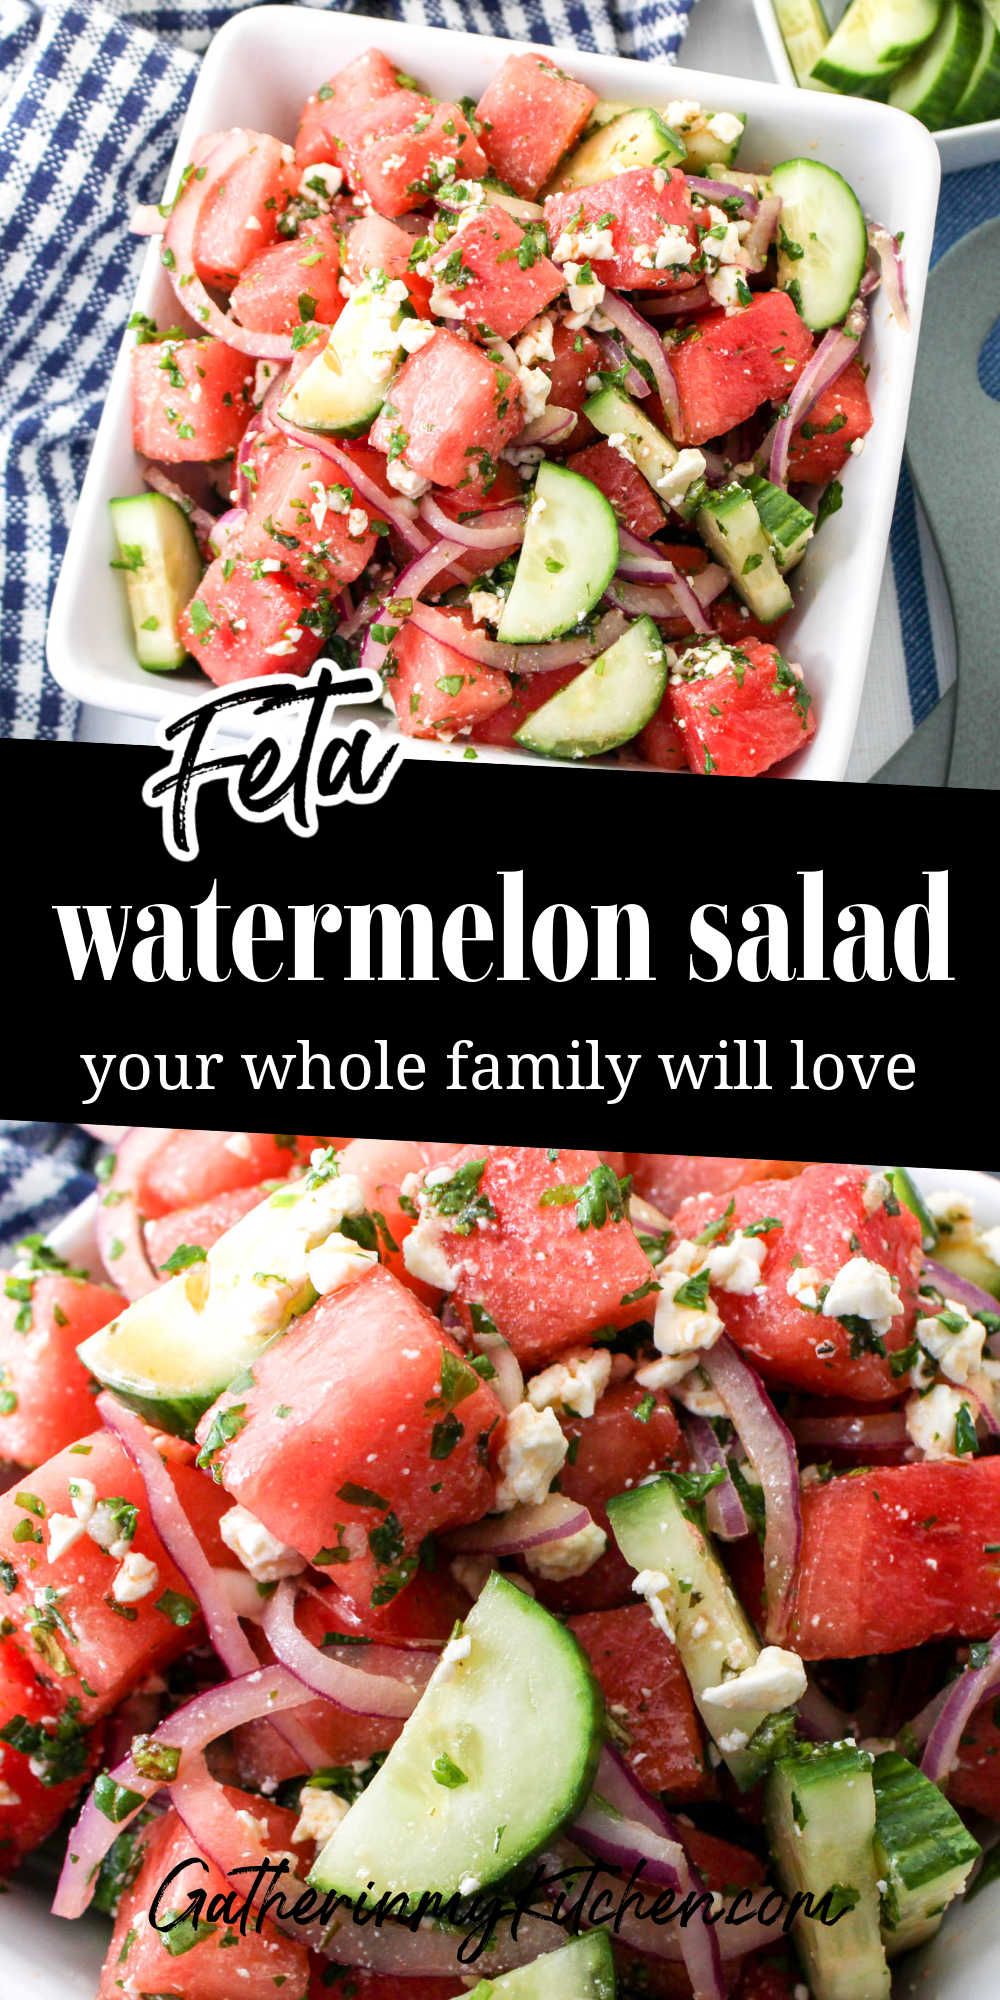 Pin image; top is watermelon salad in a bowl, middle says "Feta watermelon salad your whole family will love" and bottom is a closeup of watermelon salad.